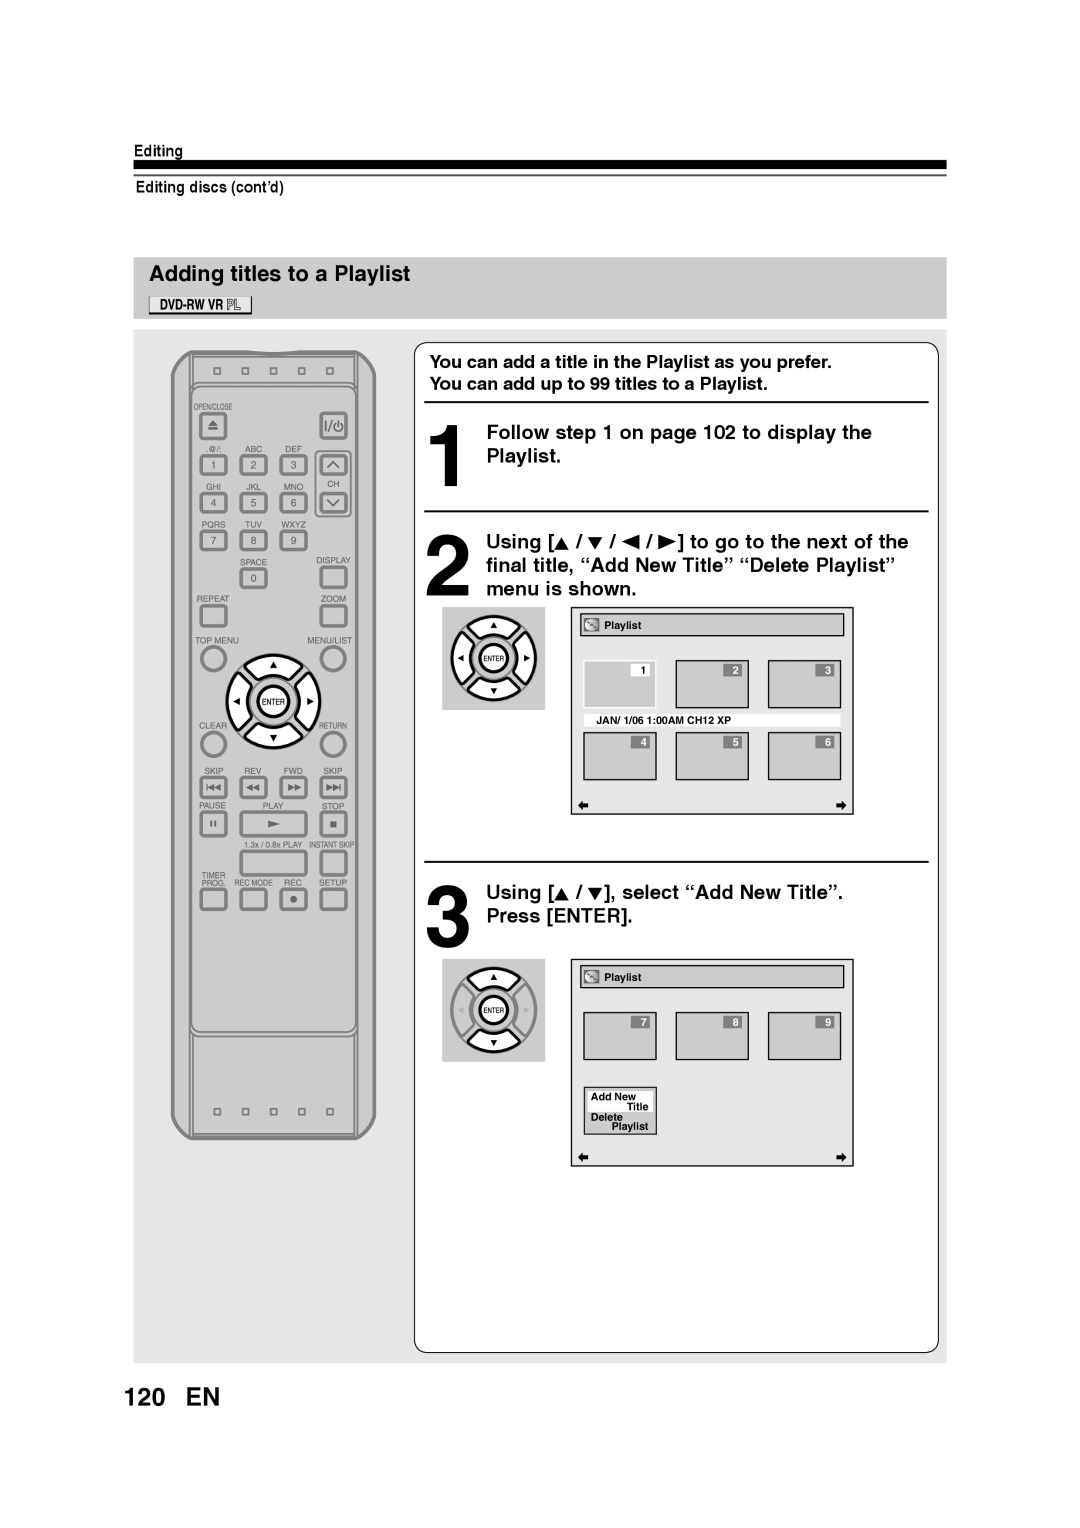 Toshiba D-RW2SU/D-RW2SC manual 120 EN, Adding titles to a Playlist, Follow on page 102 to display the Playlist 